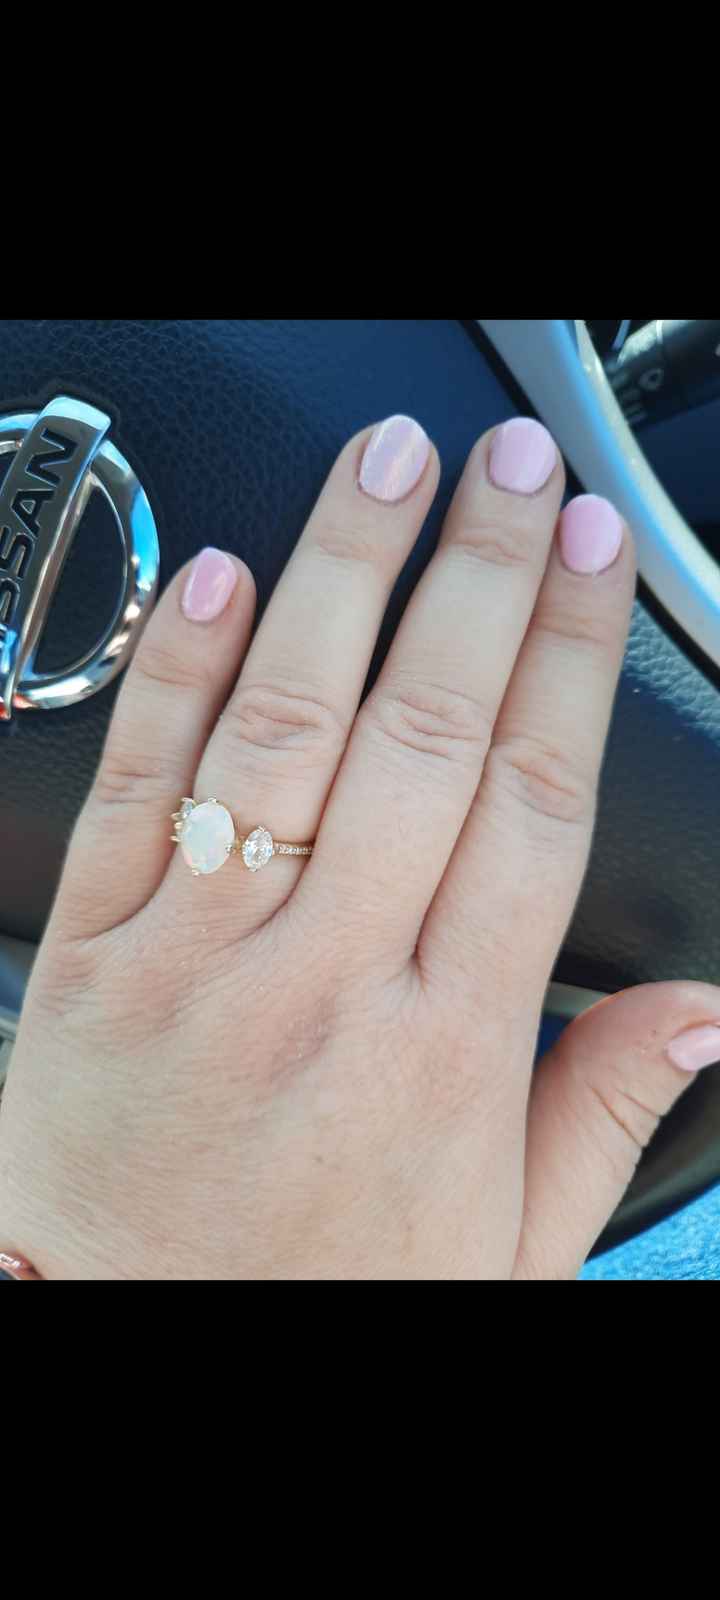 Share your engagement ring and wedding stacks! - 1